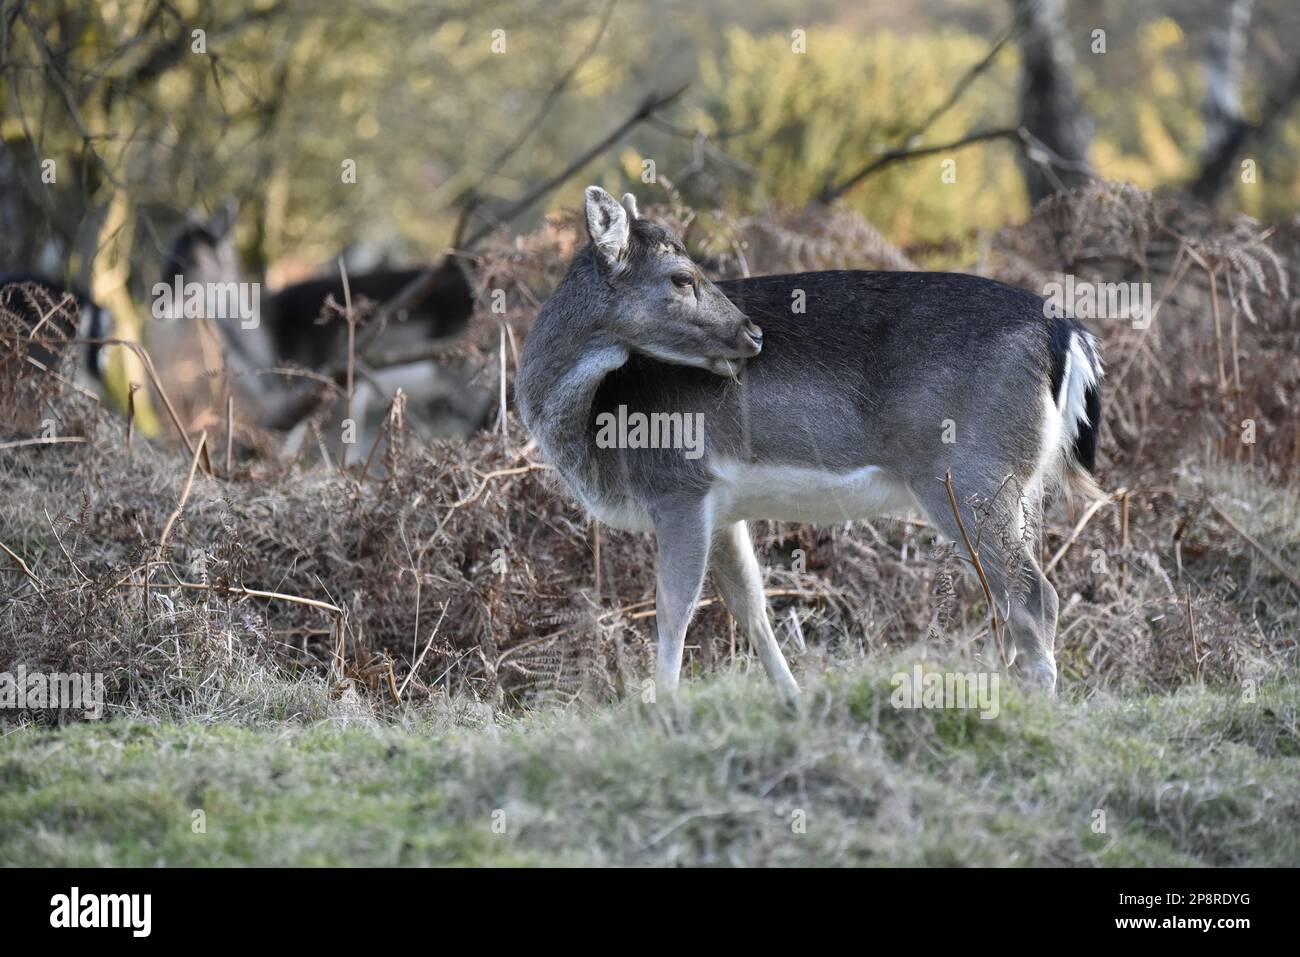 Female European Fallow Deer (Dama dama) in Forest Clearing, in Left-Profile to Right of Image with Head Turned to Groom, taken on Cannock Chase, UK Stock Photo